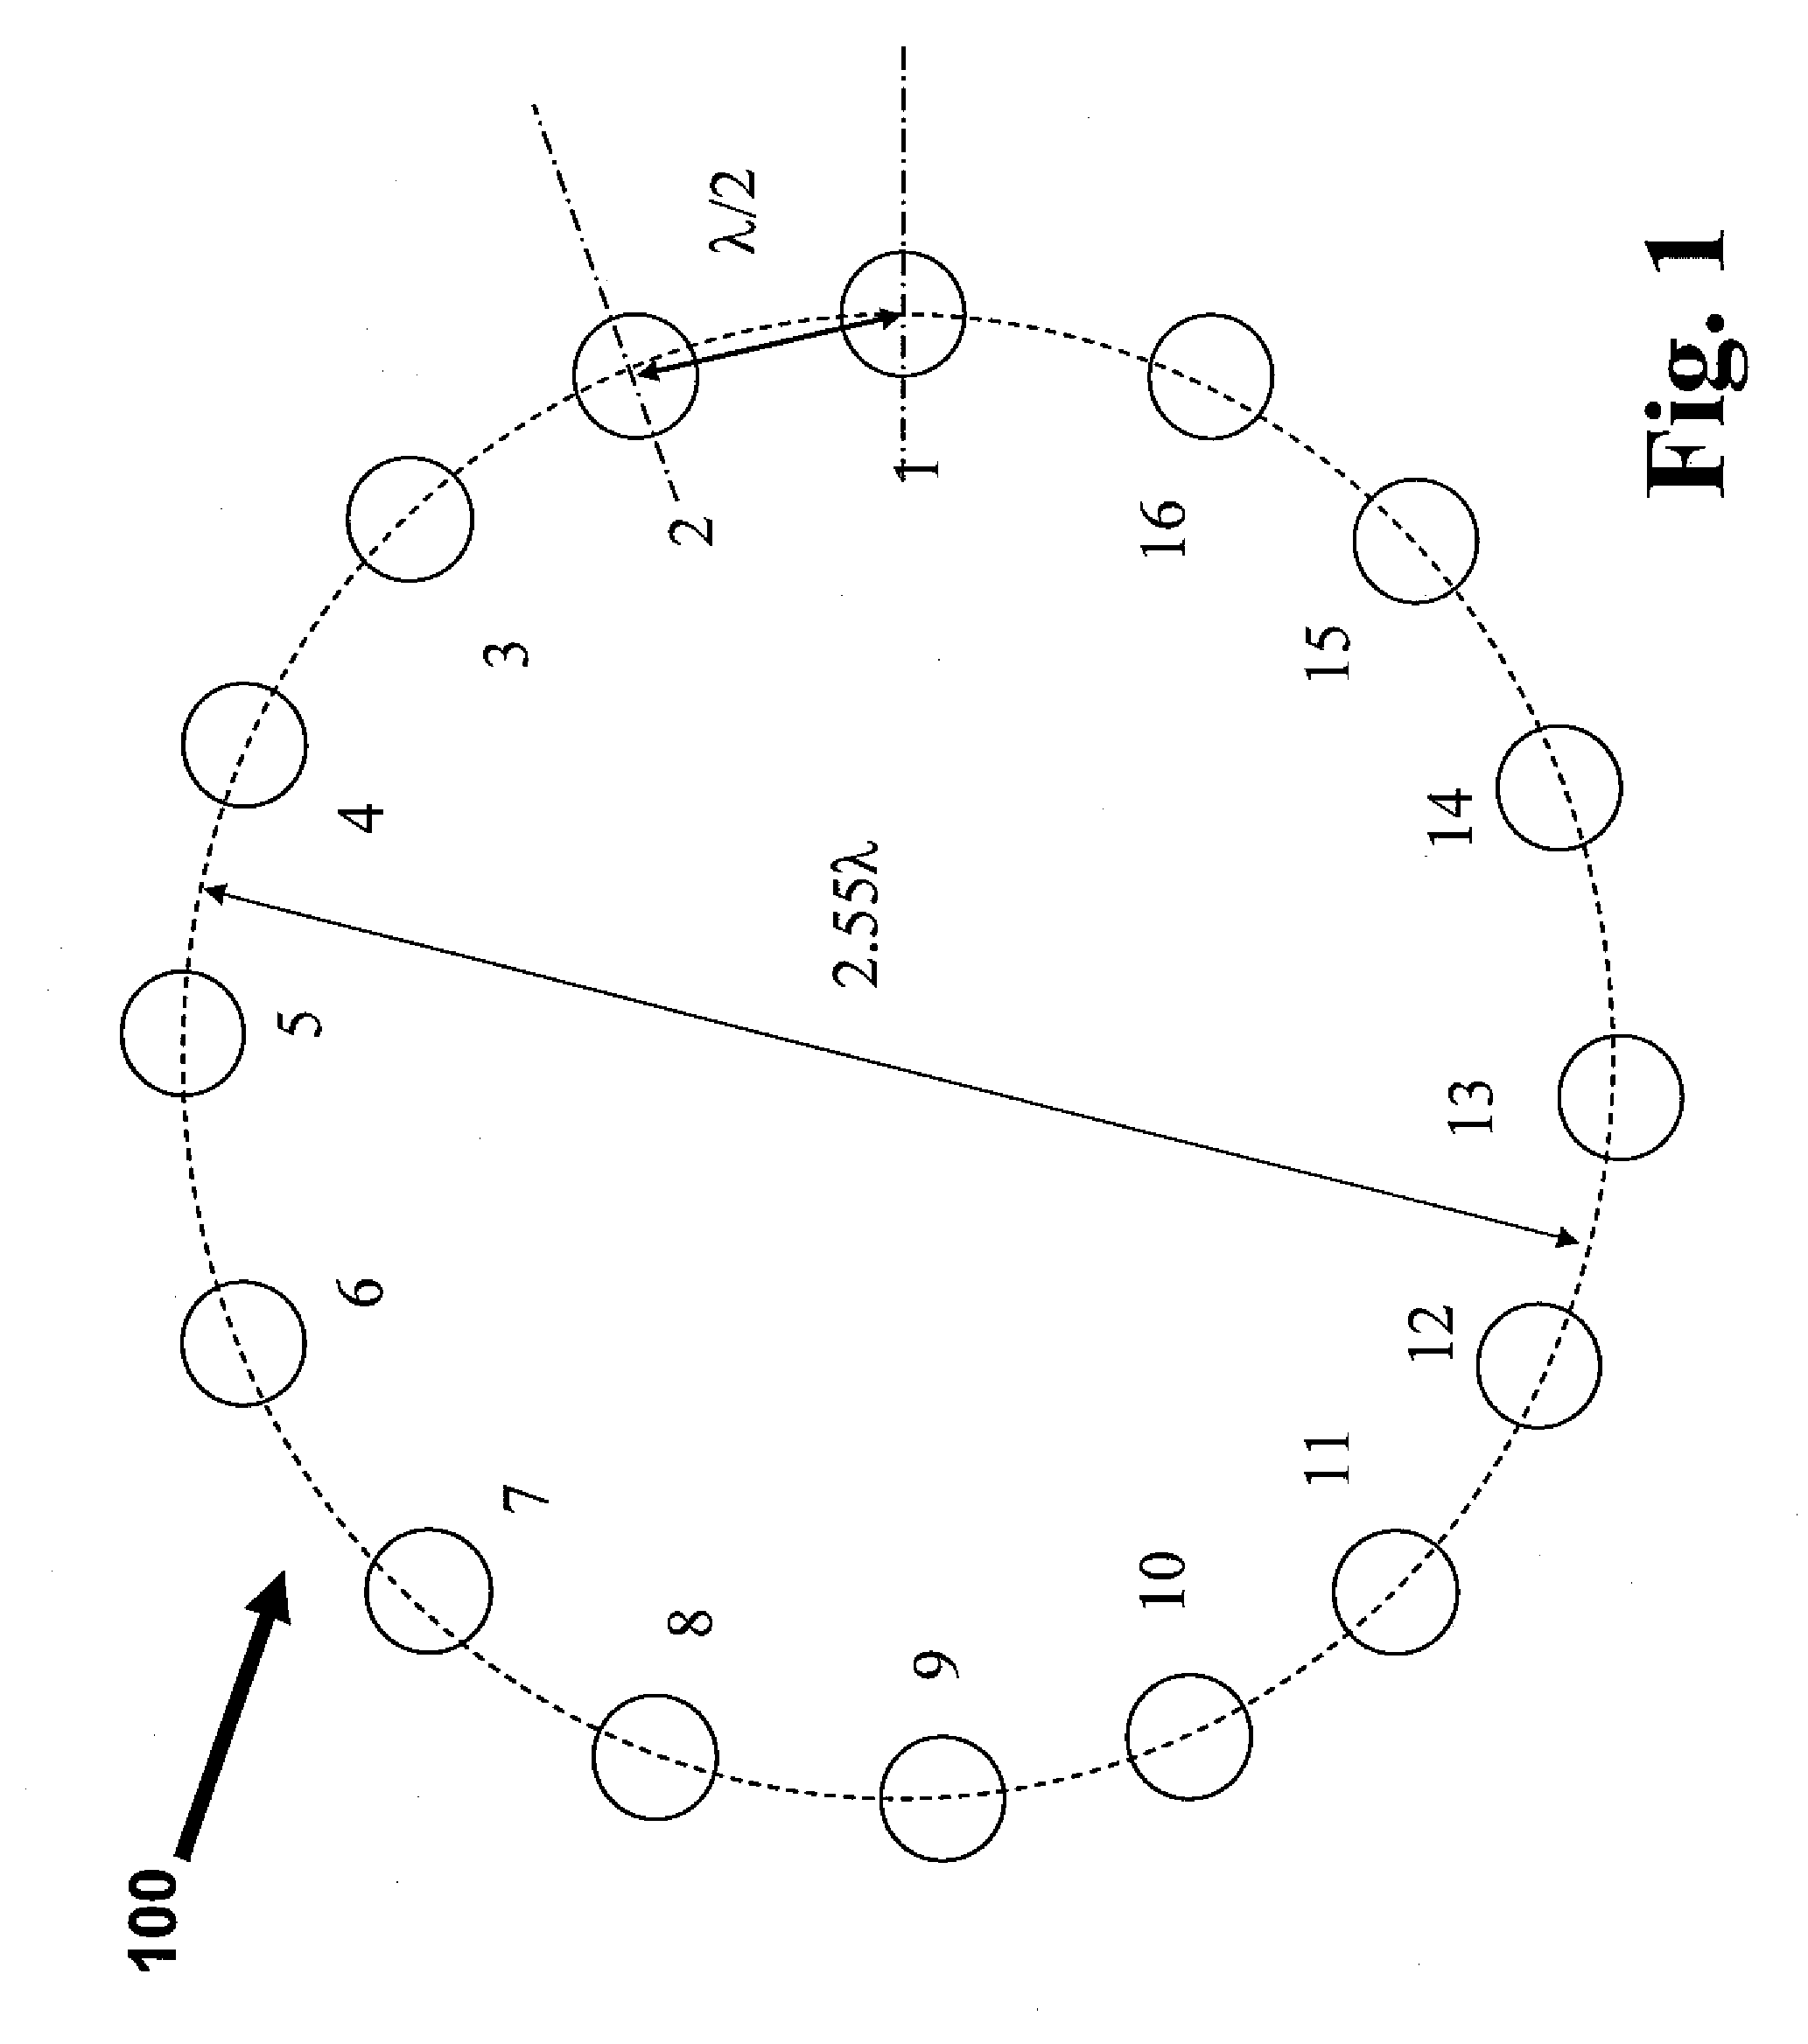 Array structure for the application to wireless switch of WLAN and wman